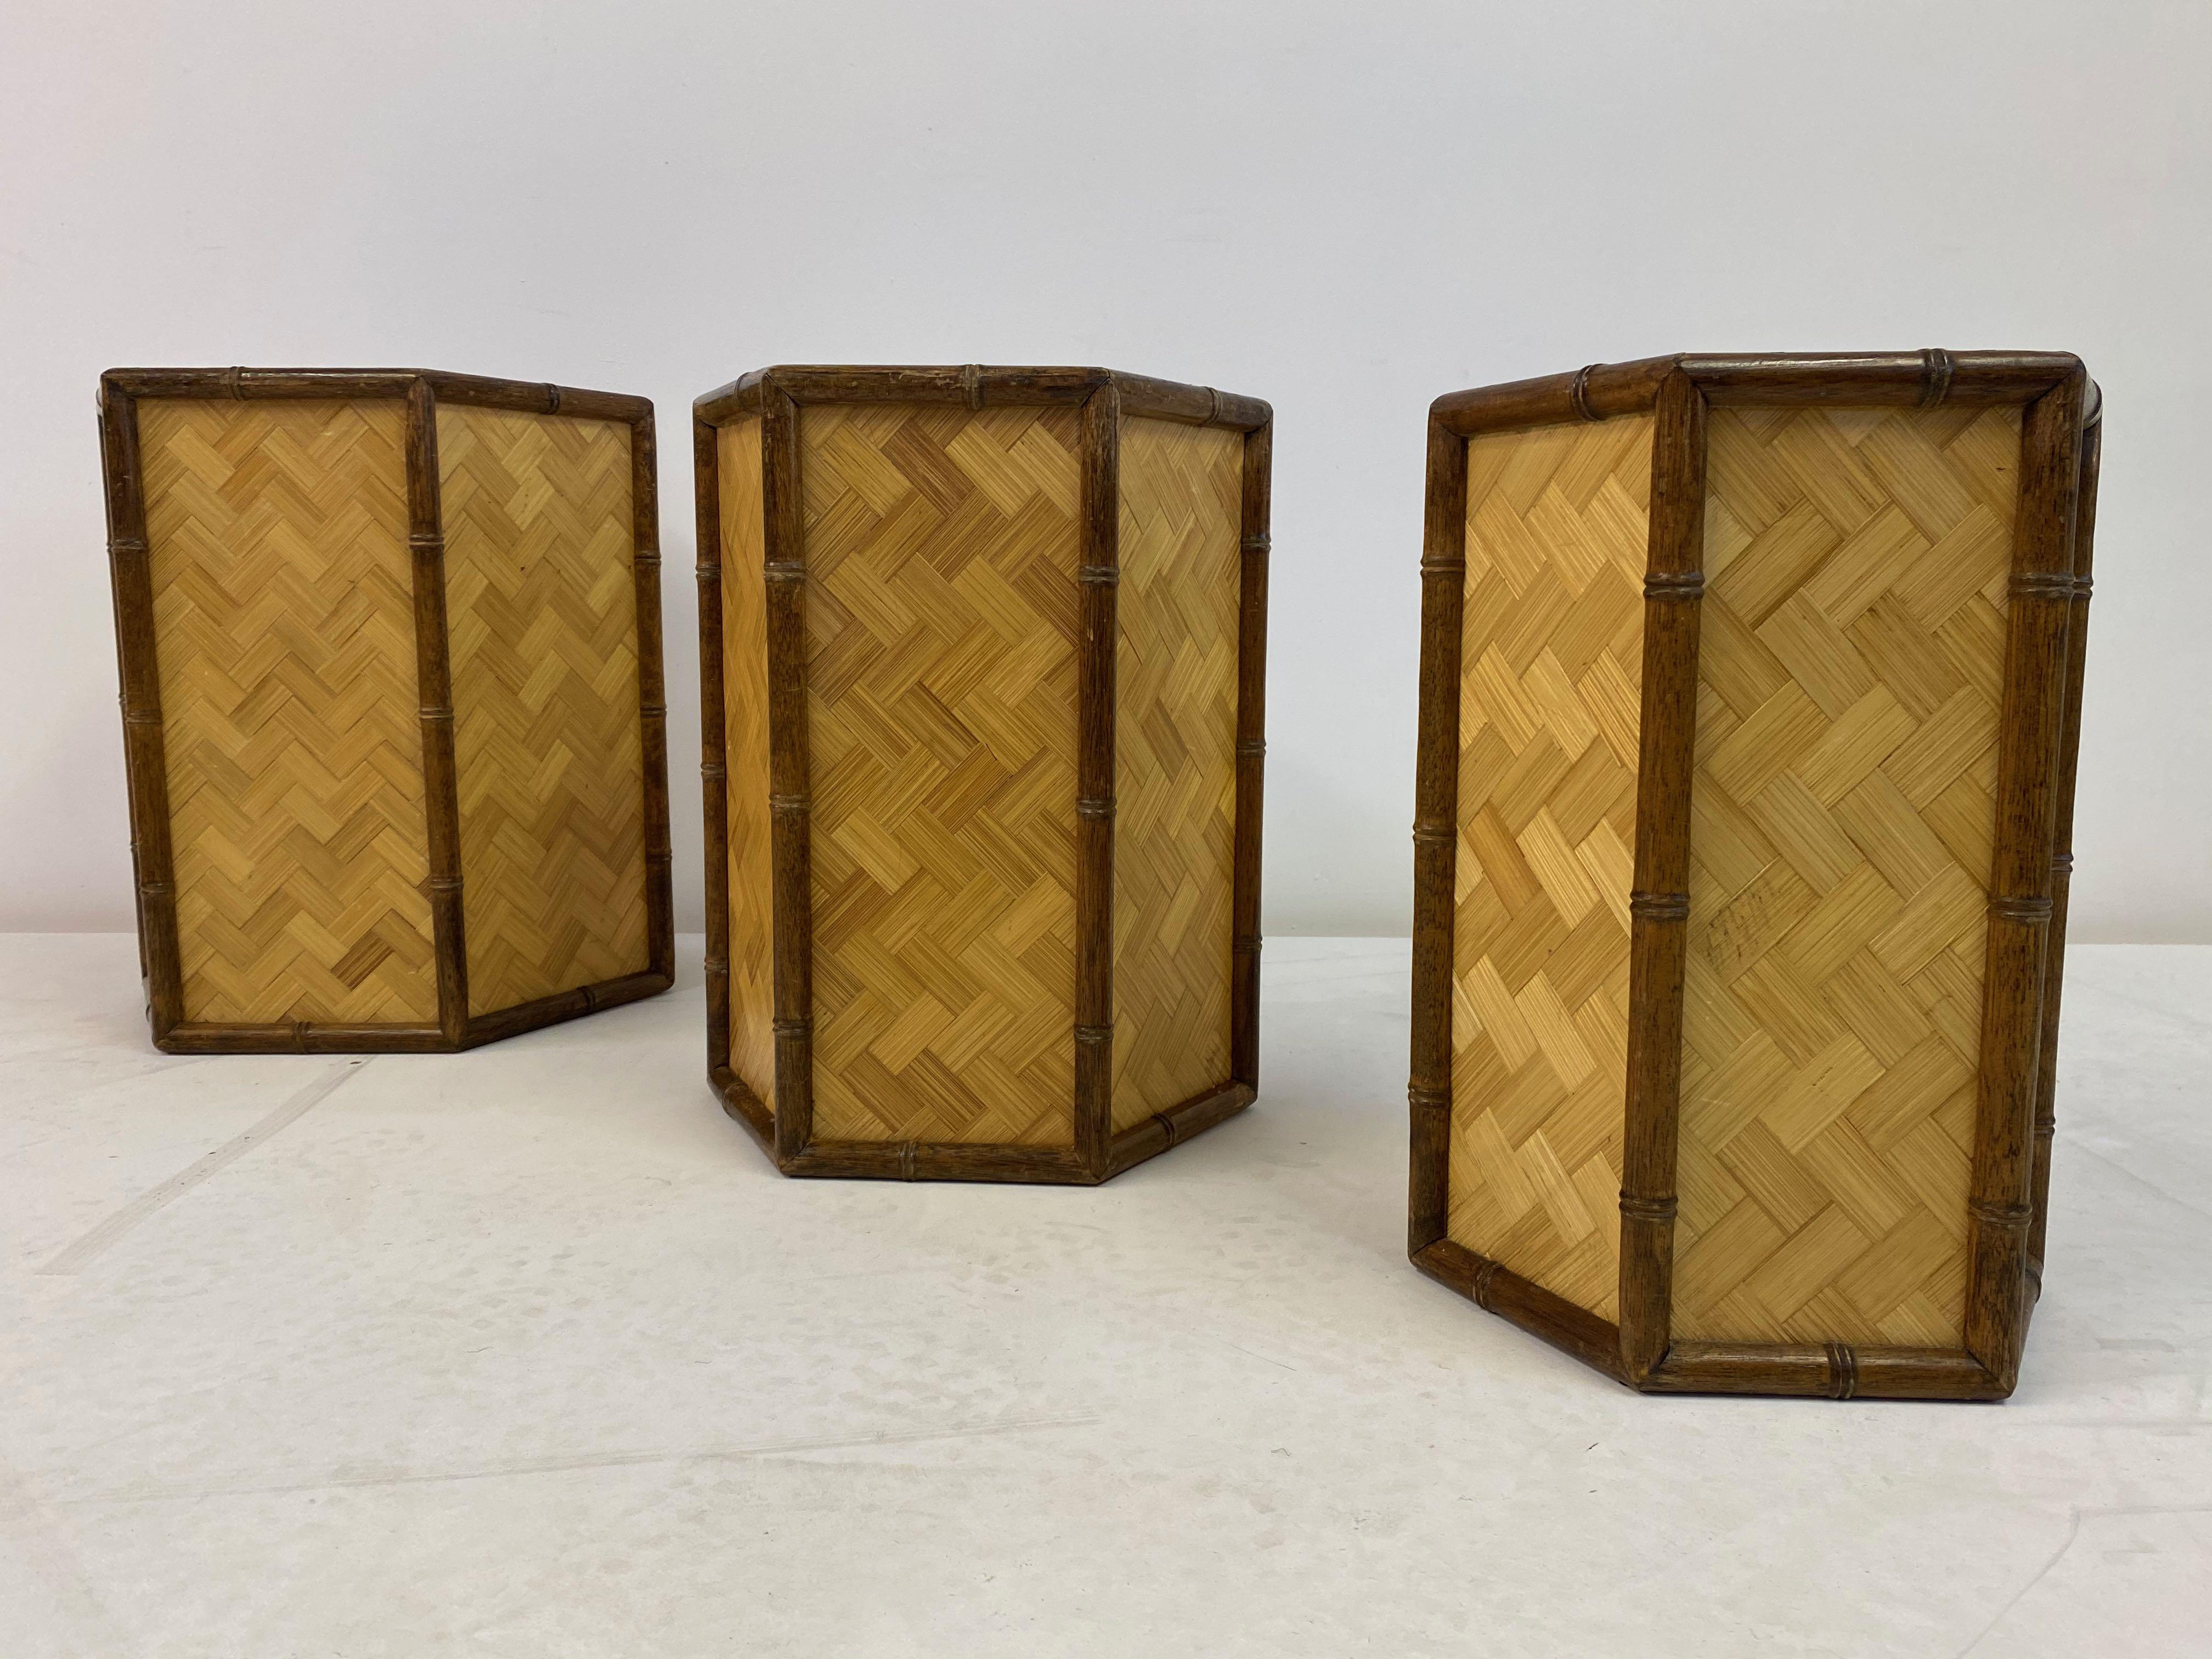 1970s Set of Three Graduated Rattan and Bamboo Planters or Baskets In Good Condition For Sale In London, London